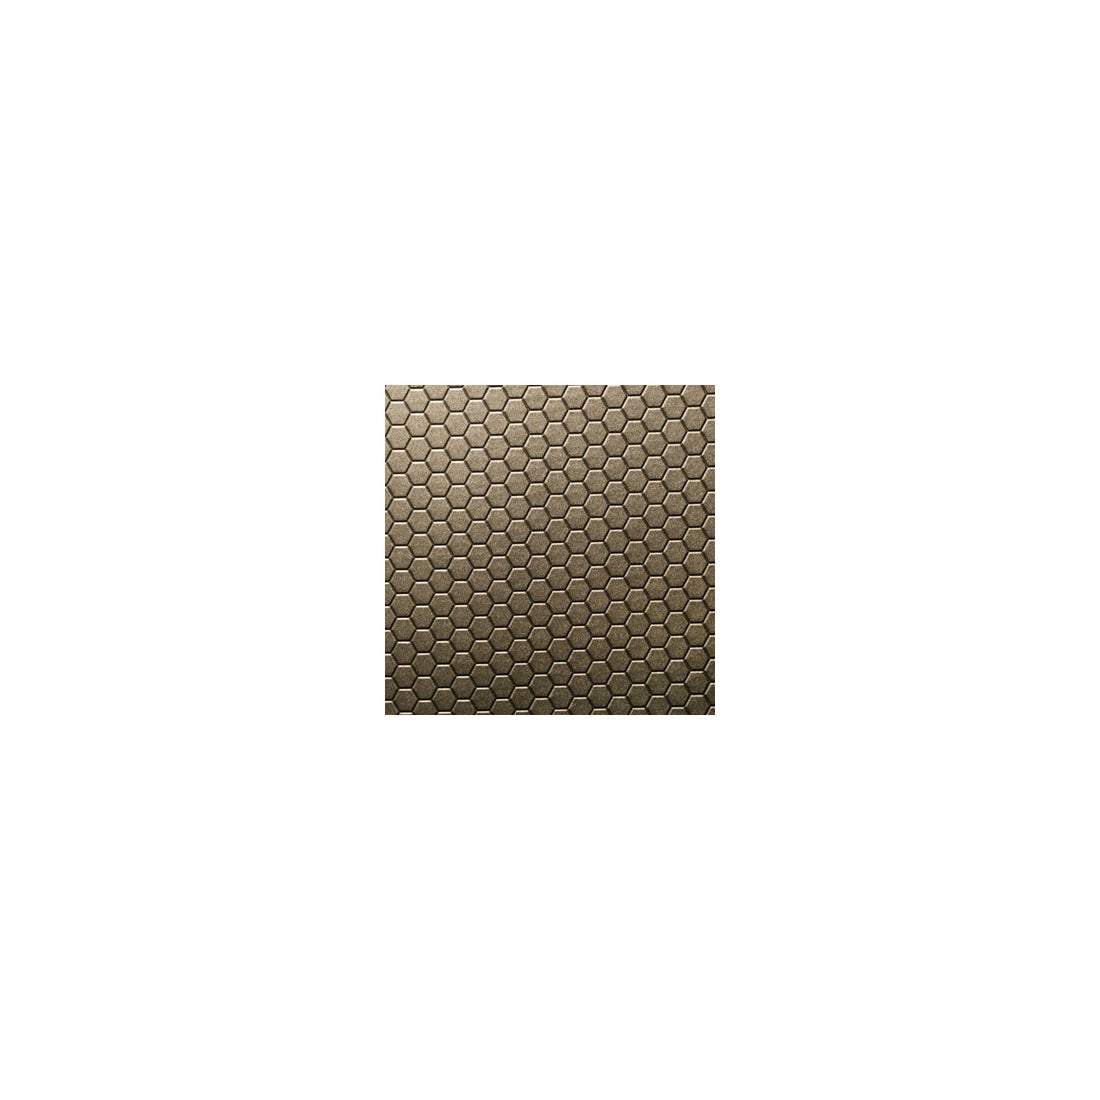 Toba fabric in bronze color - pattern TOBA.16.0 - by Kravet Design in the Performance Sta Kleen collection